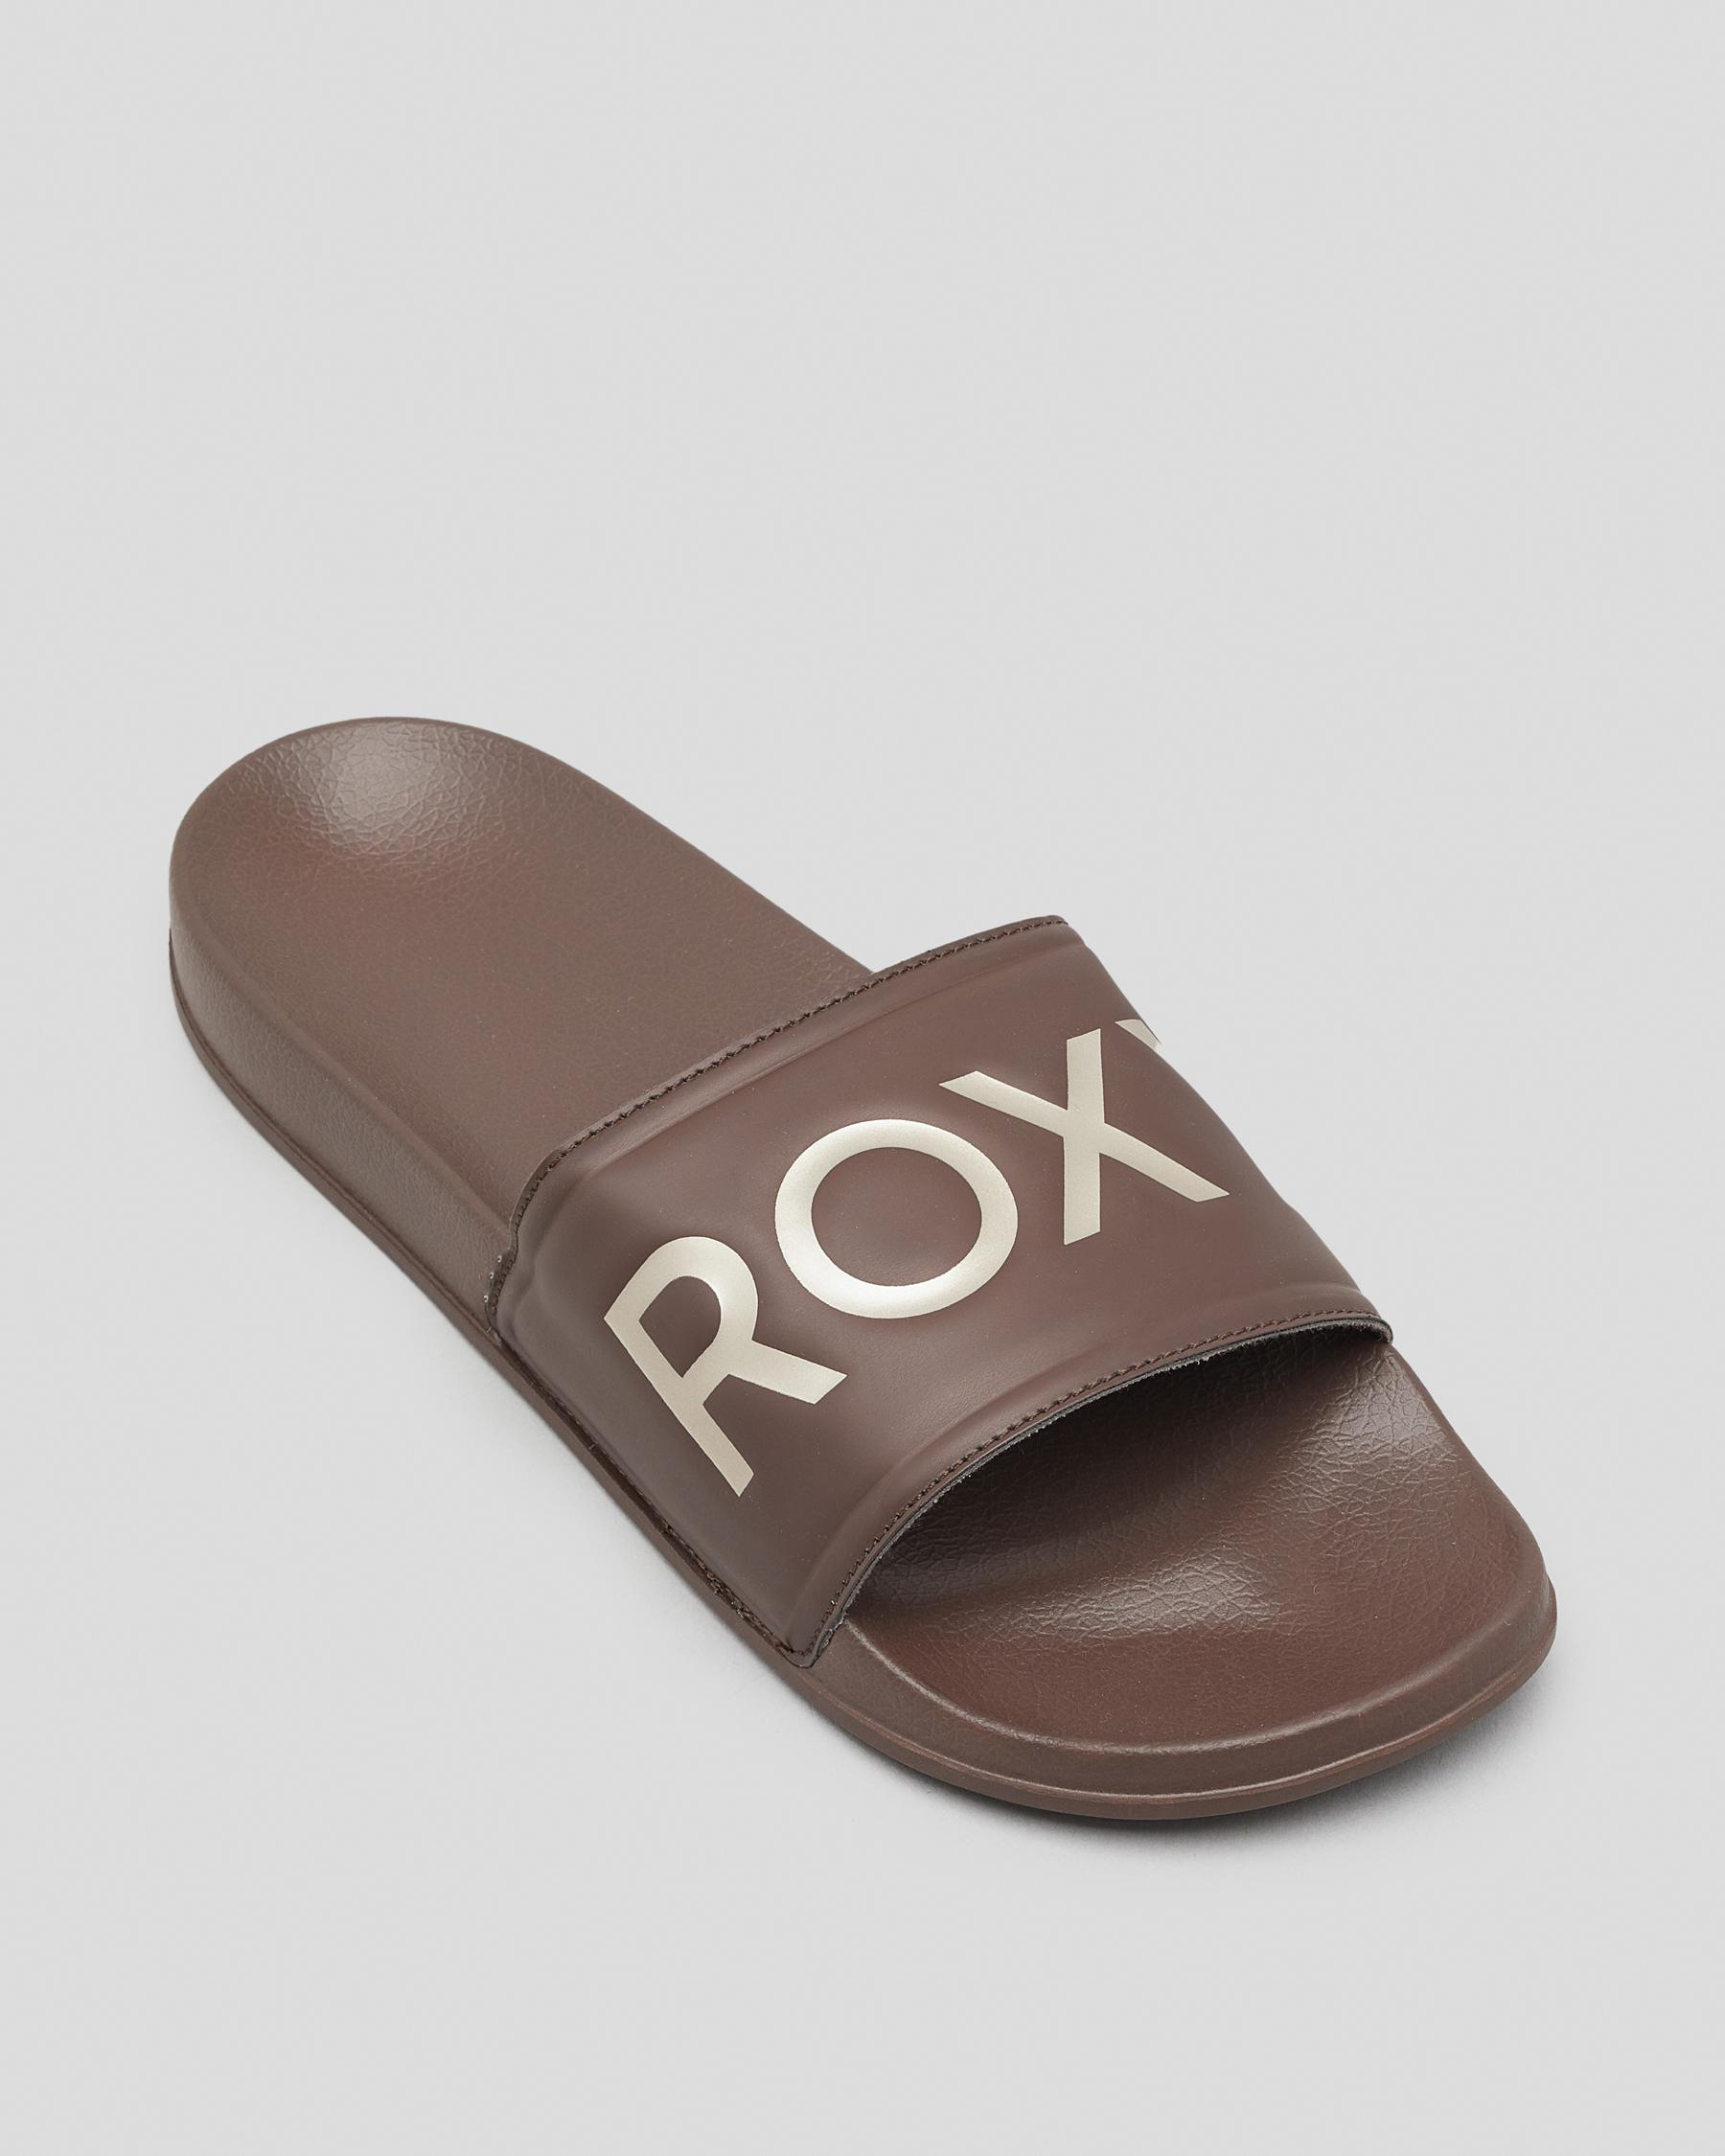 Shop Roxy Slippy Slide Sandals In Chocolate - Fast Shipping & Easy ...